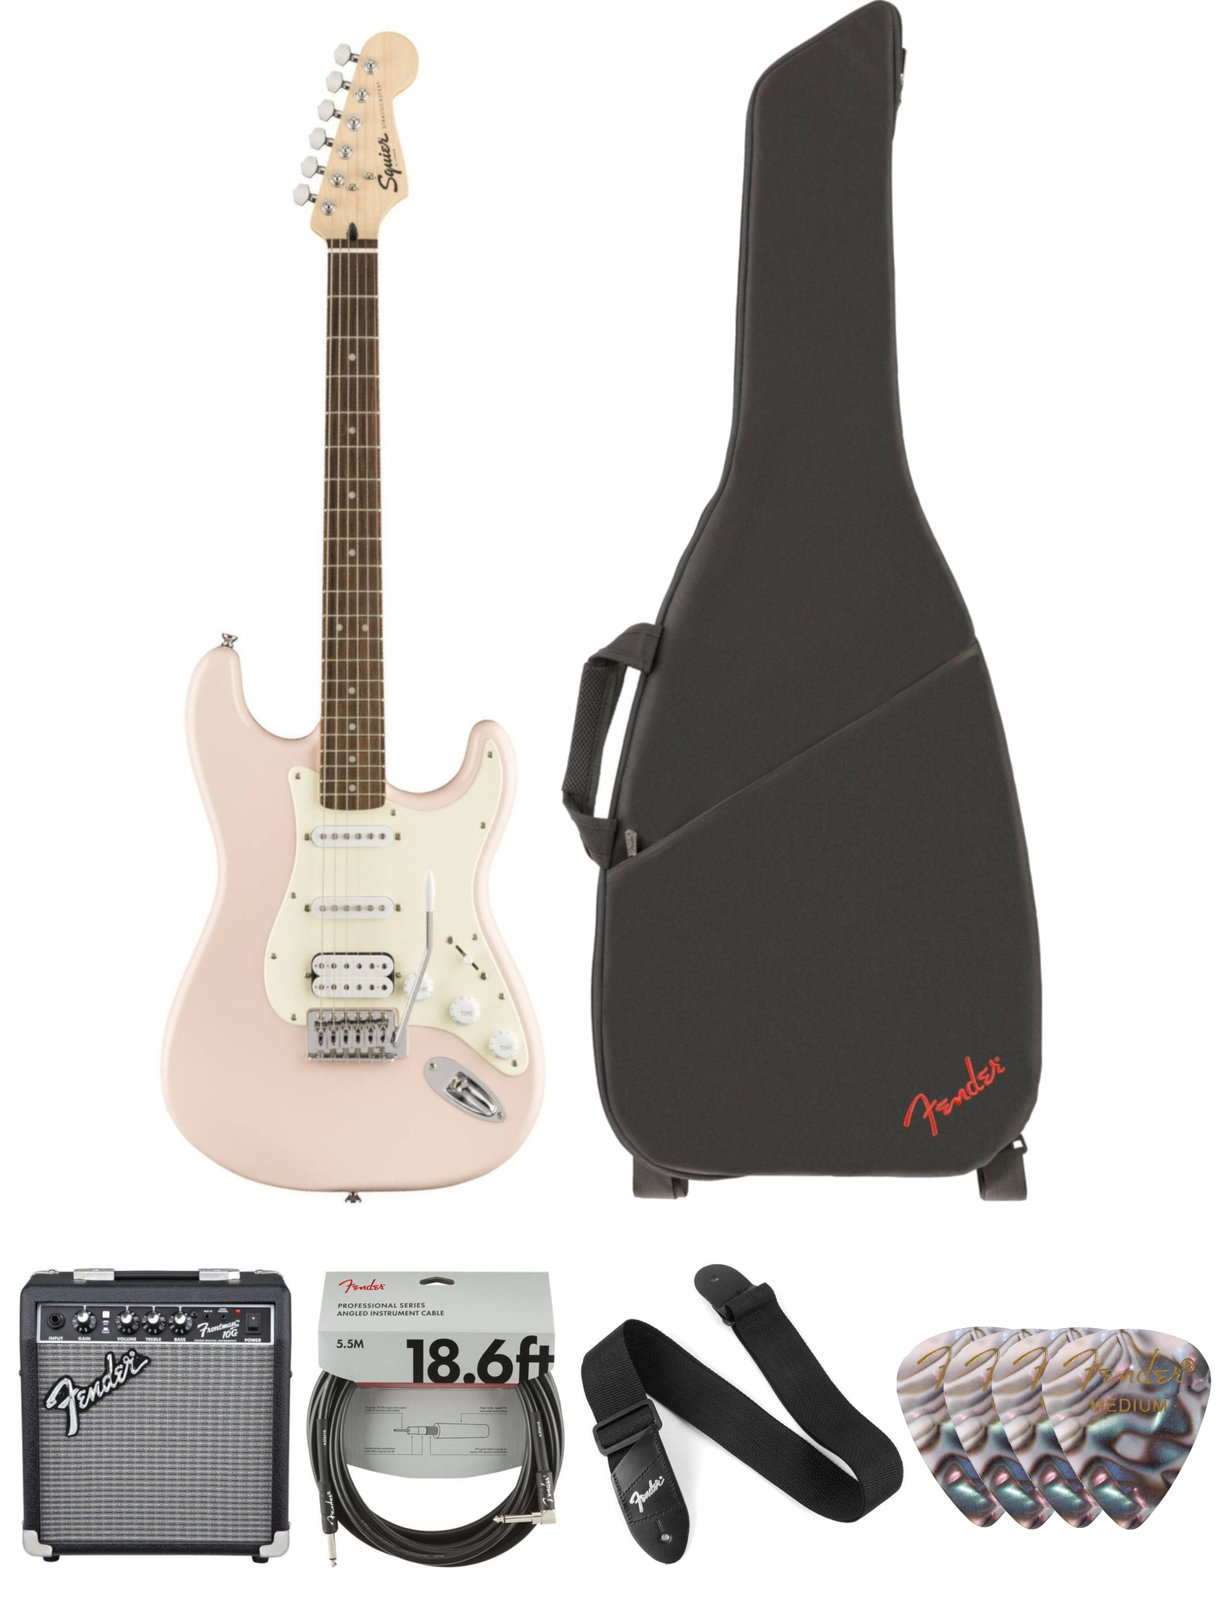 E-Gitarre Fender Squier Bullet Stratocaster Tremolo HSS IL Shell Pink Deluxe SET Shell Pink